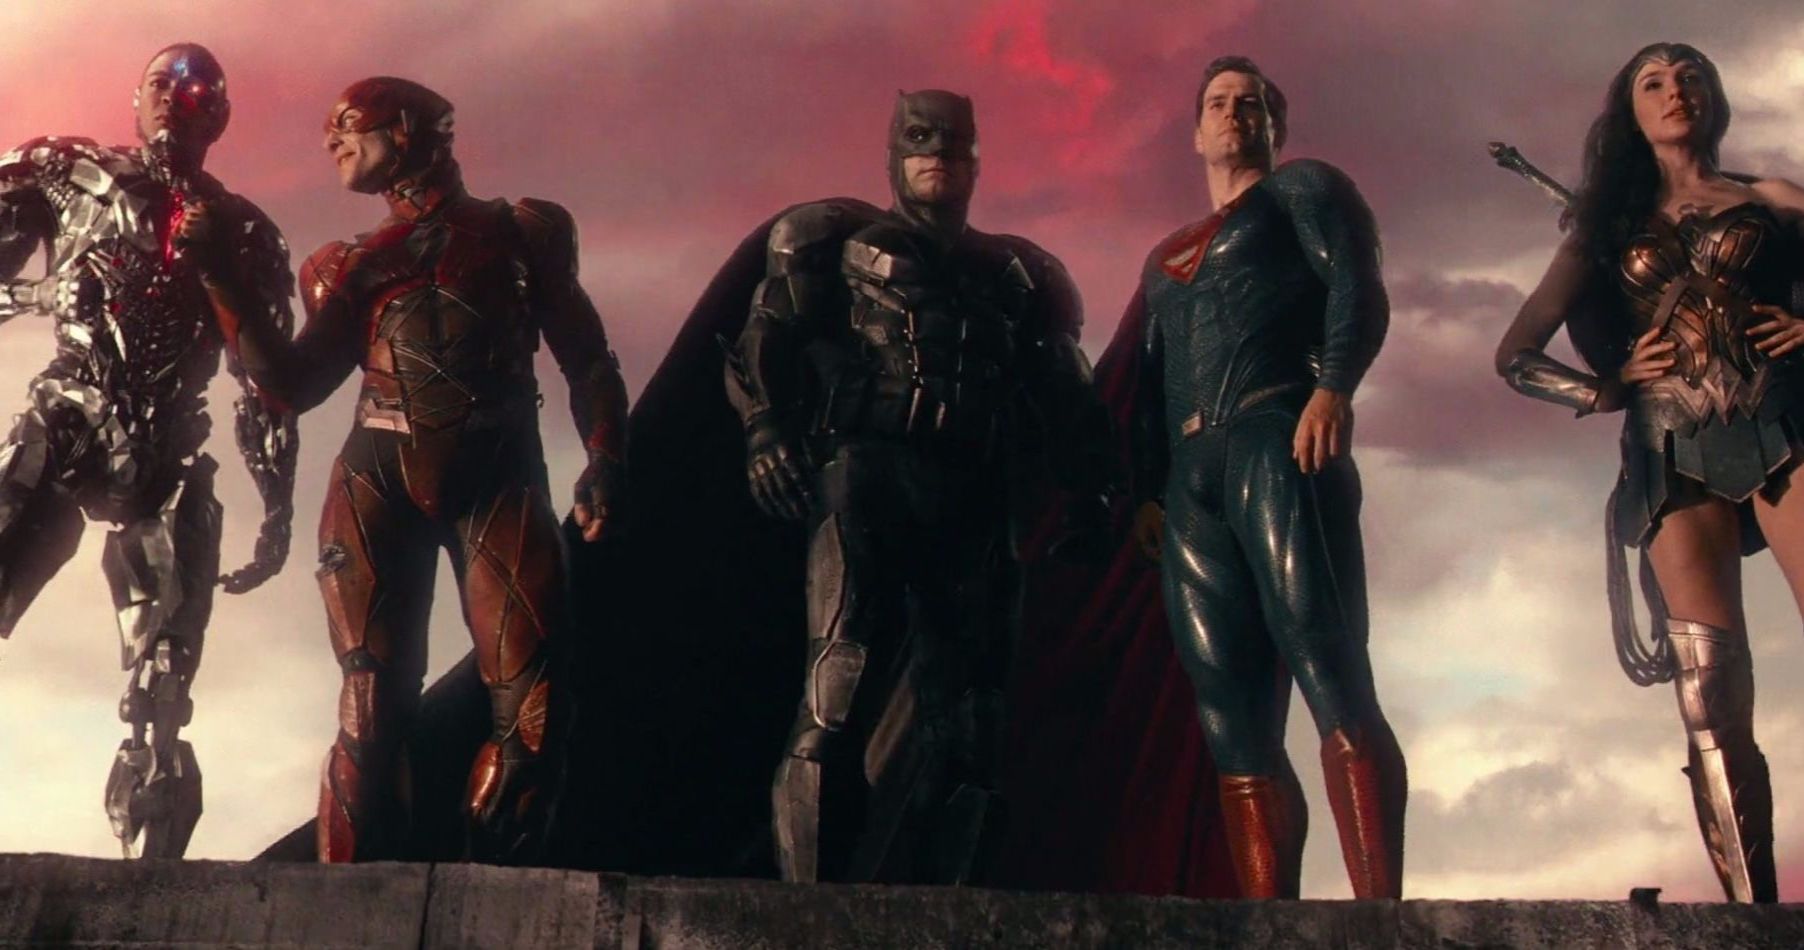 Zack Snyder's Justice League Trailer Is Already Being Worked On